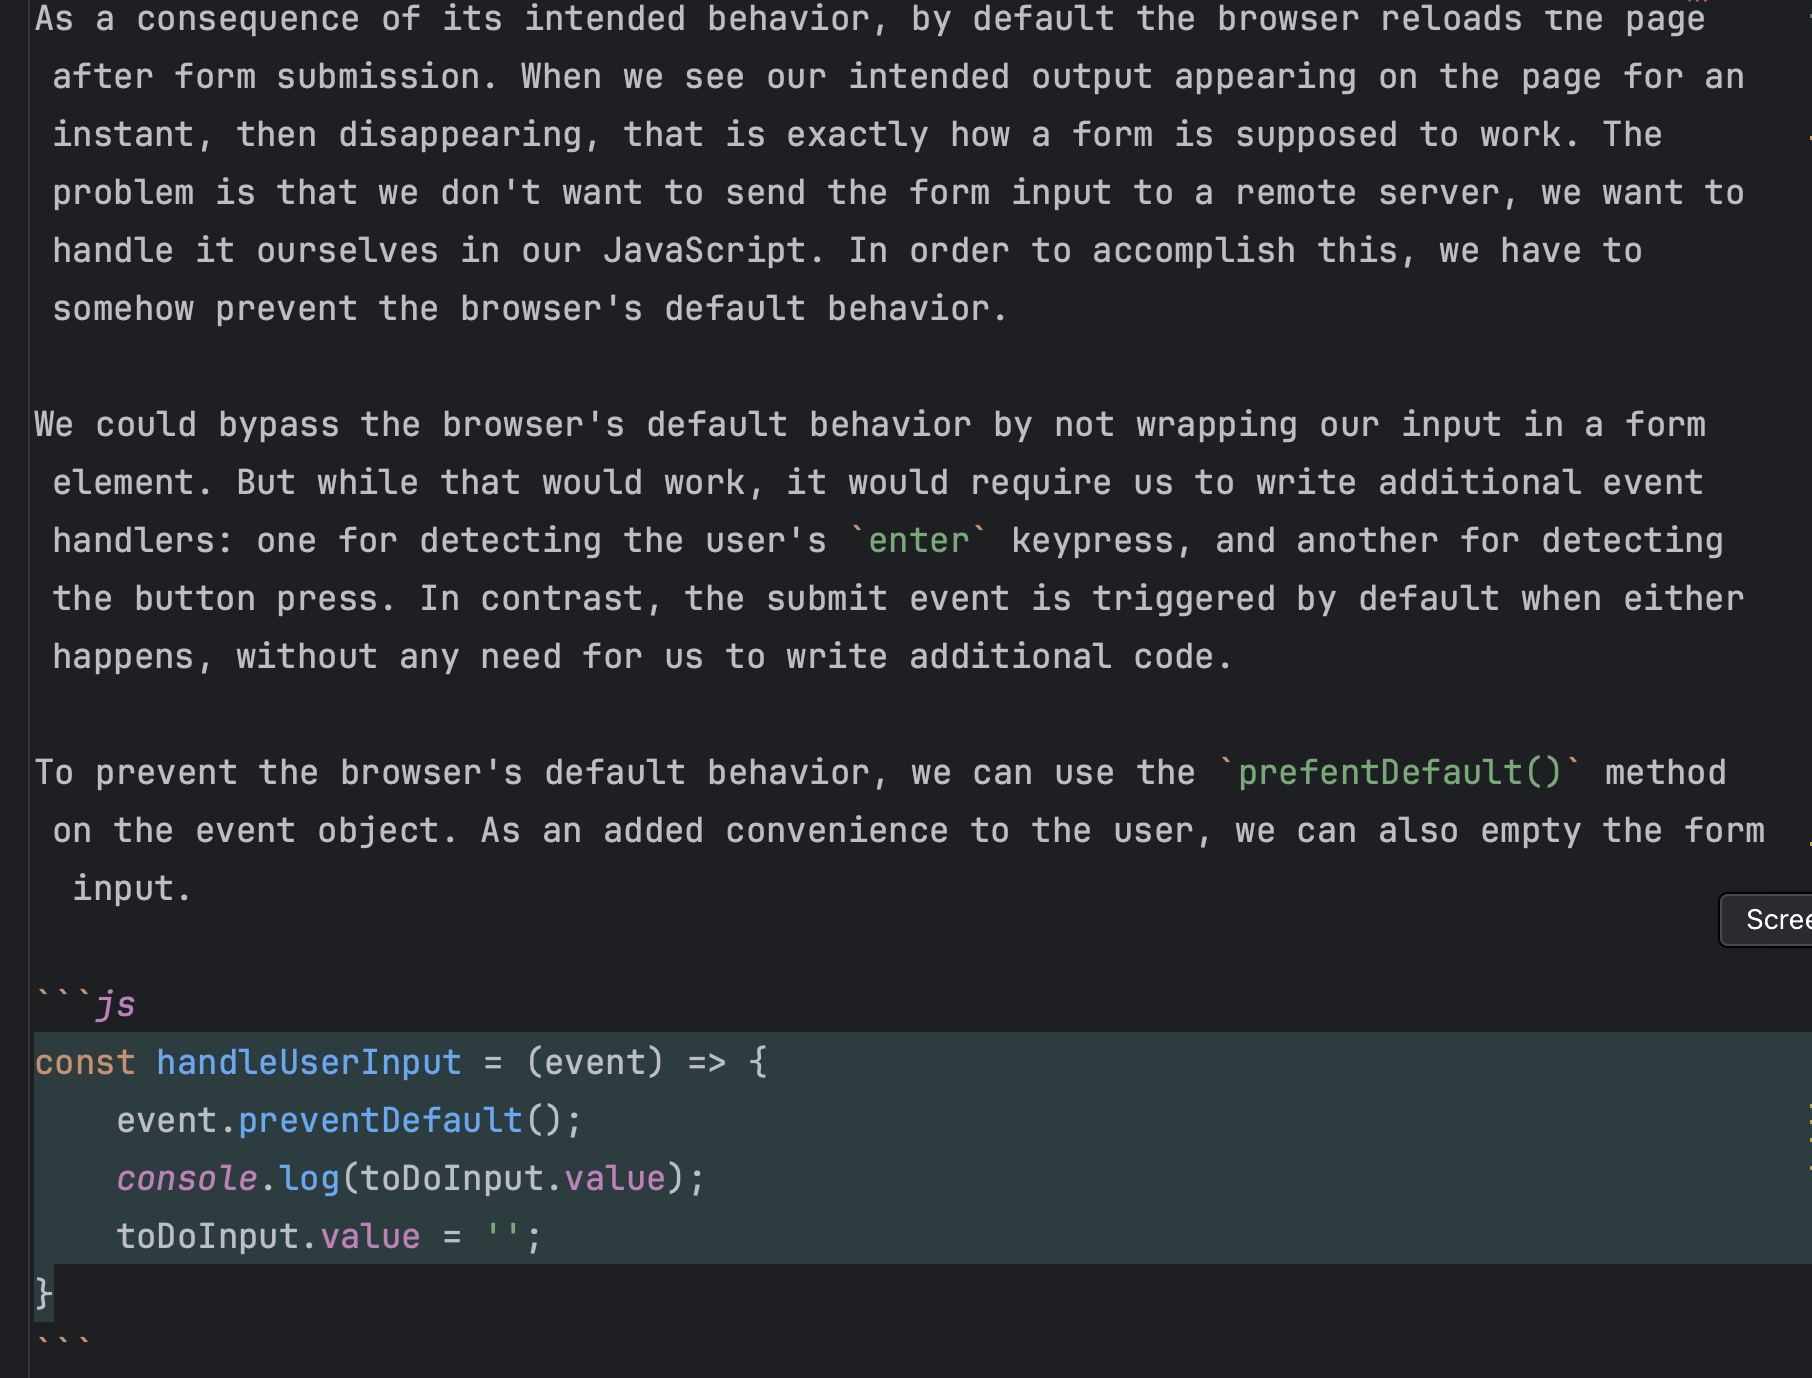 explanation for a snippet of JavaScript code